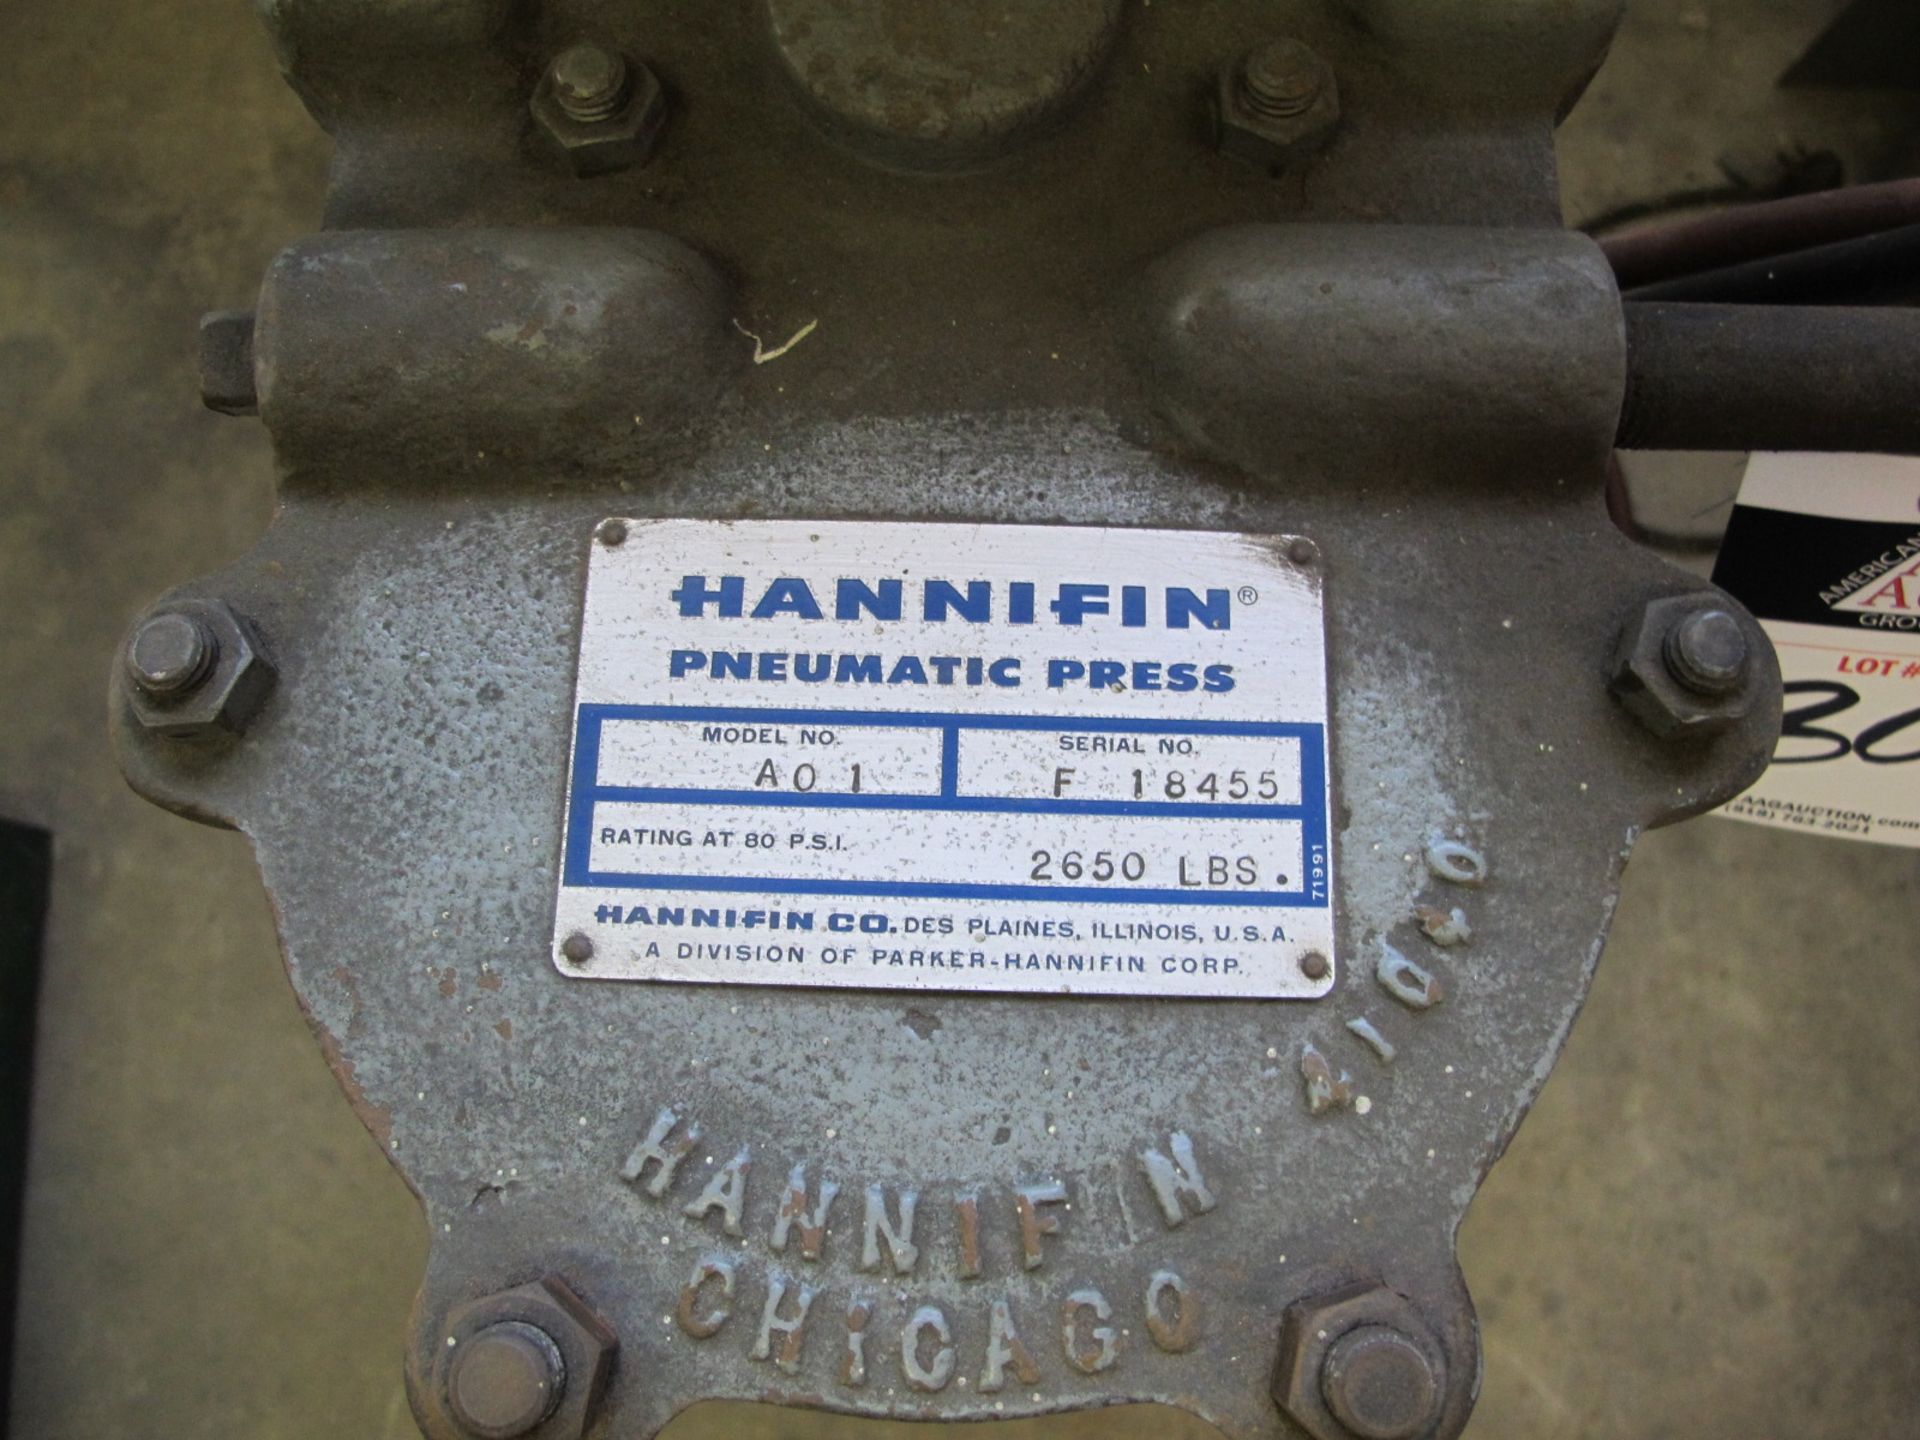 Hannifin Pneumatic Press Mdl A01 2650lb - Image 2 of 3